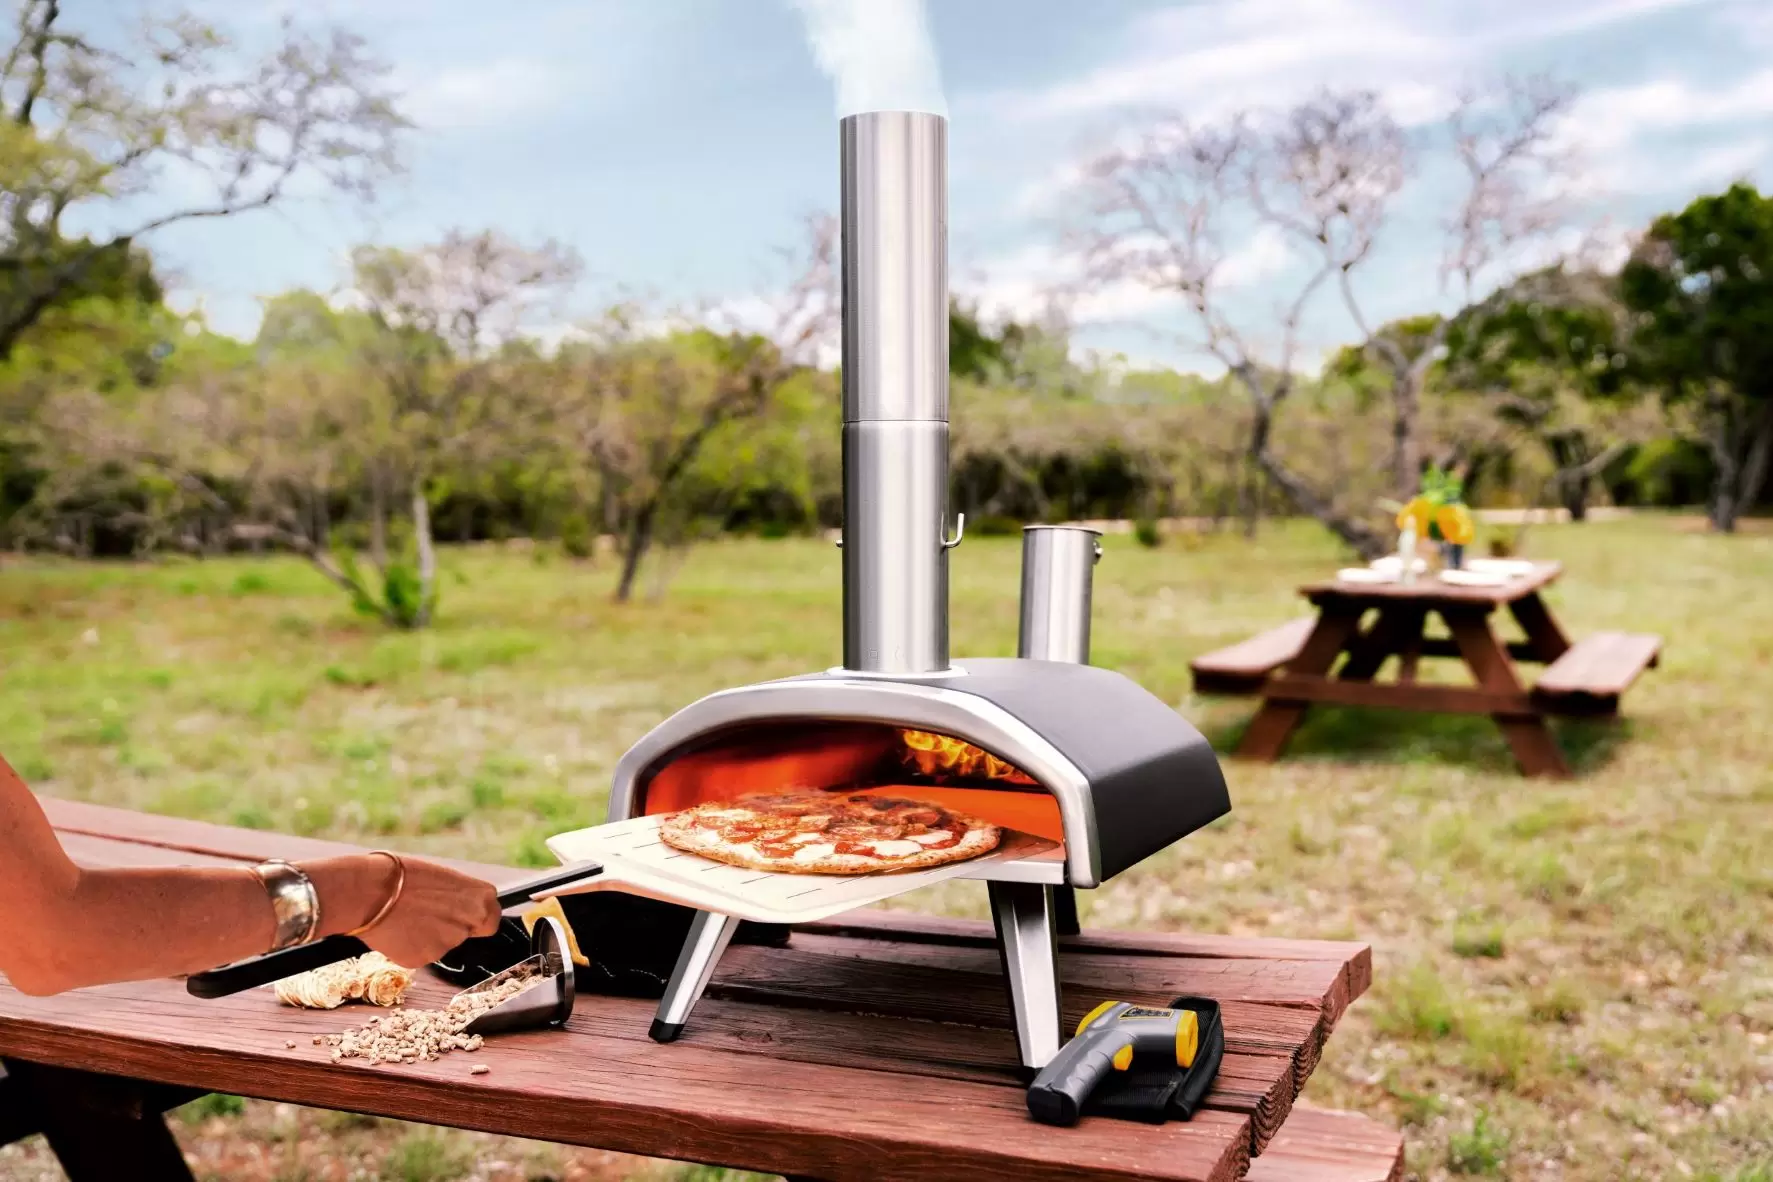 How to make amazing pizza at home using the Ooni Fyra 12 - MeanderApparel